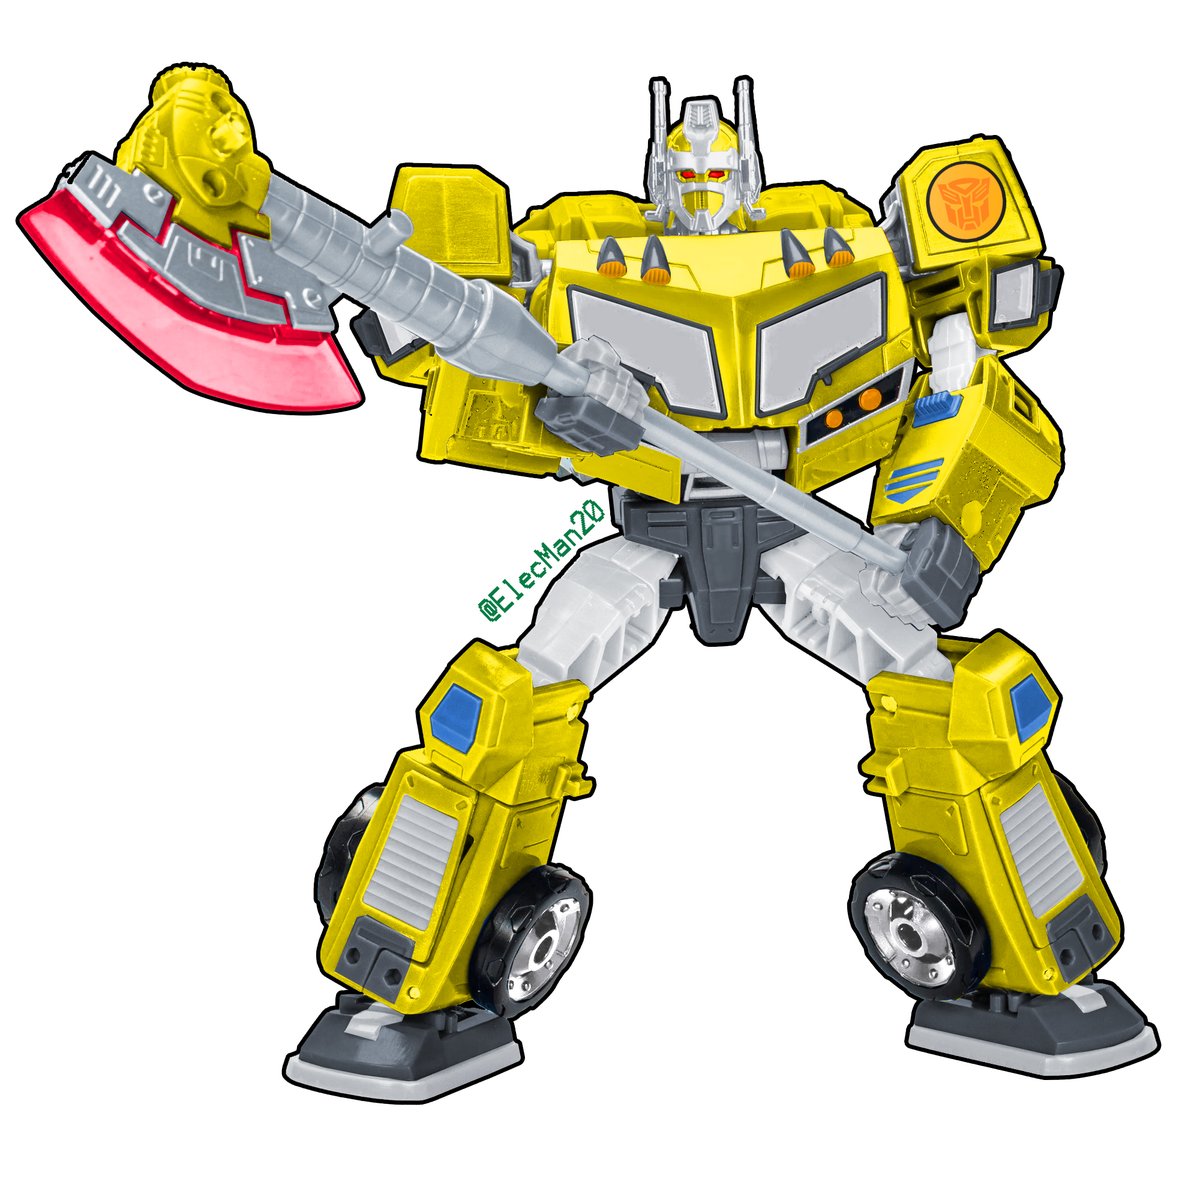 Legacy Yellow Splendid Convoy. For this Digibash I was inspired by @TJOmega last video that mentioned that the Animated Optimus mold would work for Splendid Convoy. #Digibash #Legacy #Transformers #YellowSplendidConvoy